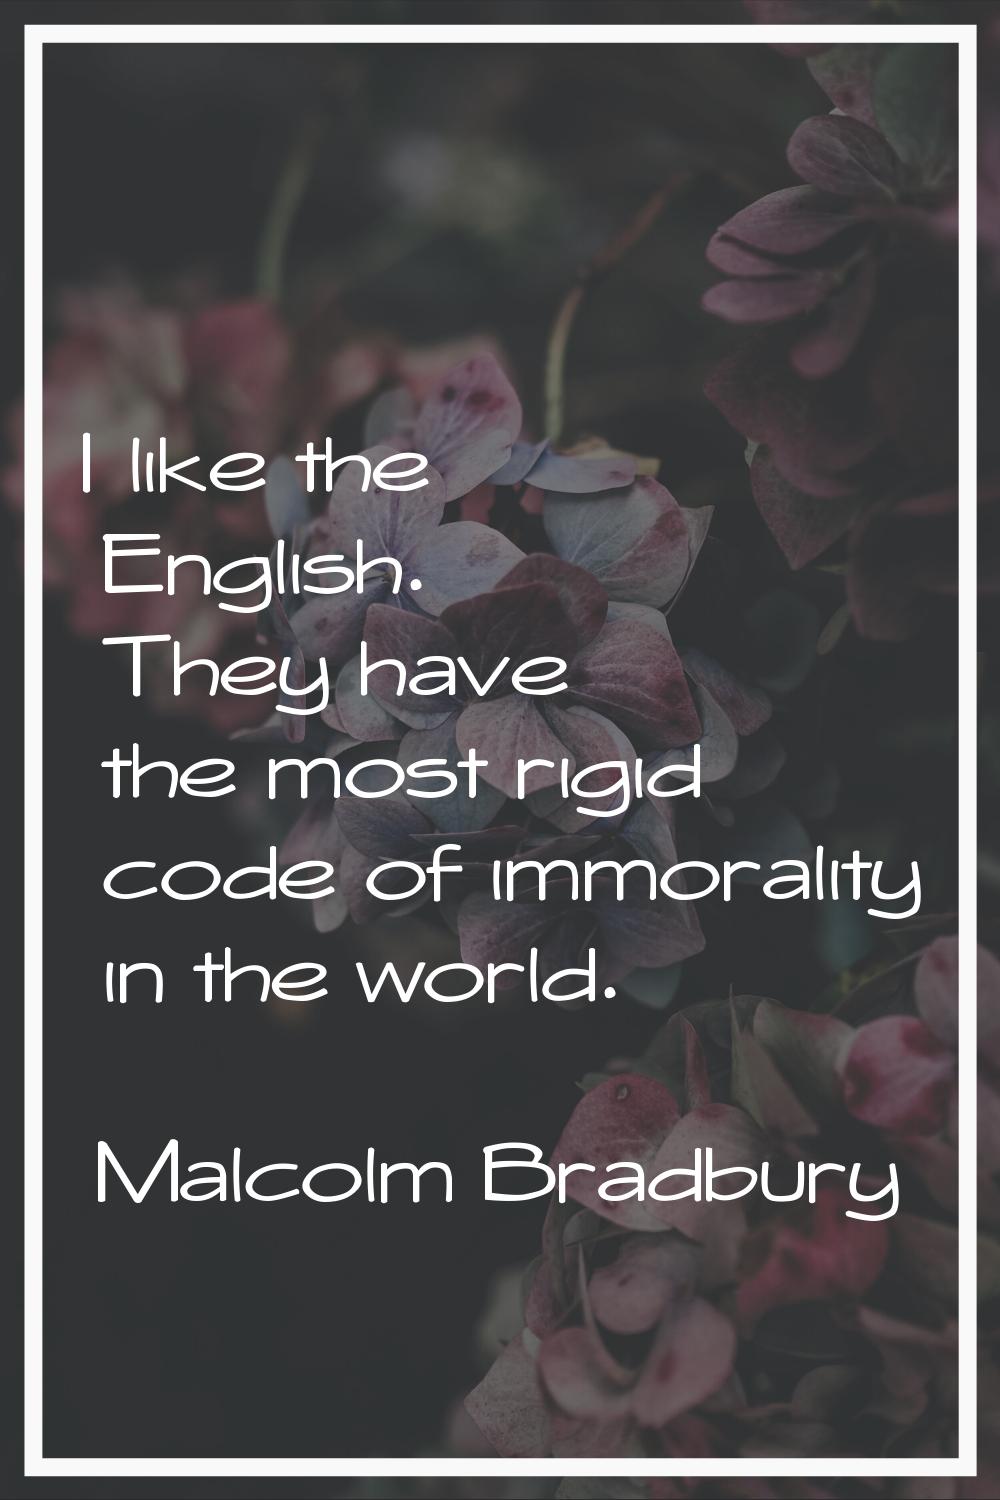 I like the English. They have the most rigid code of immorality in the world.